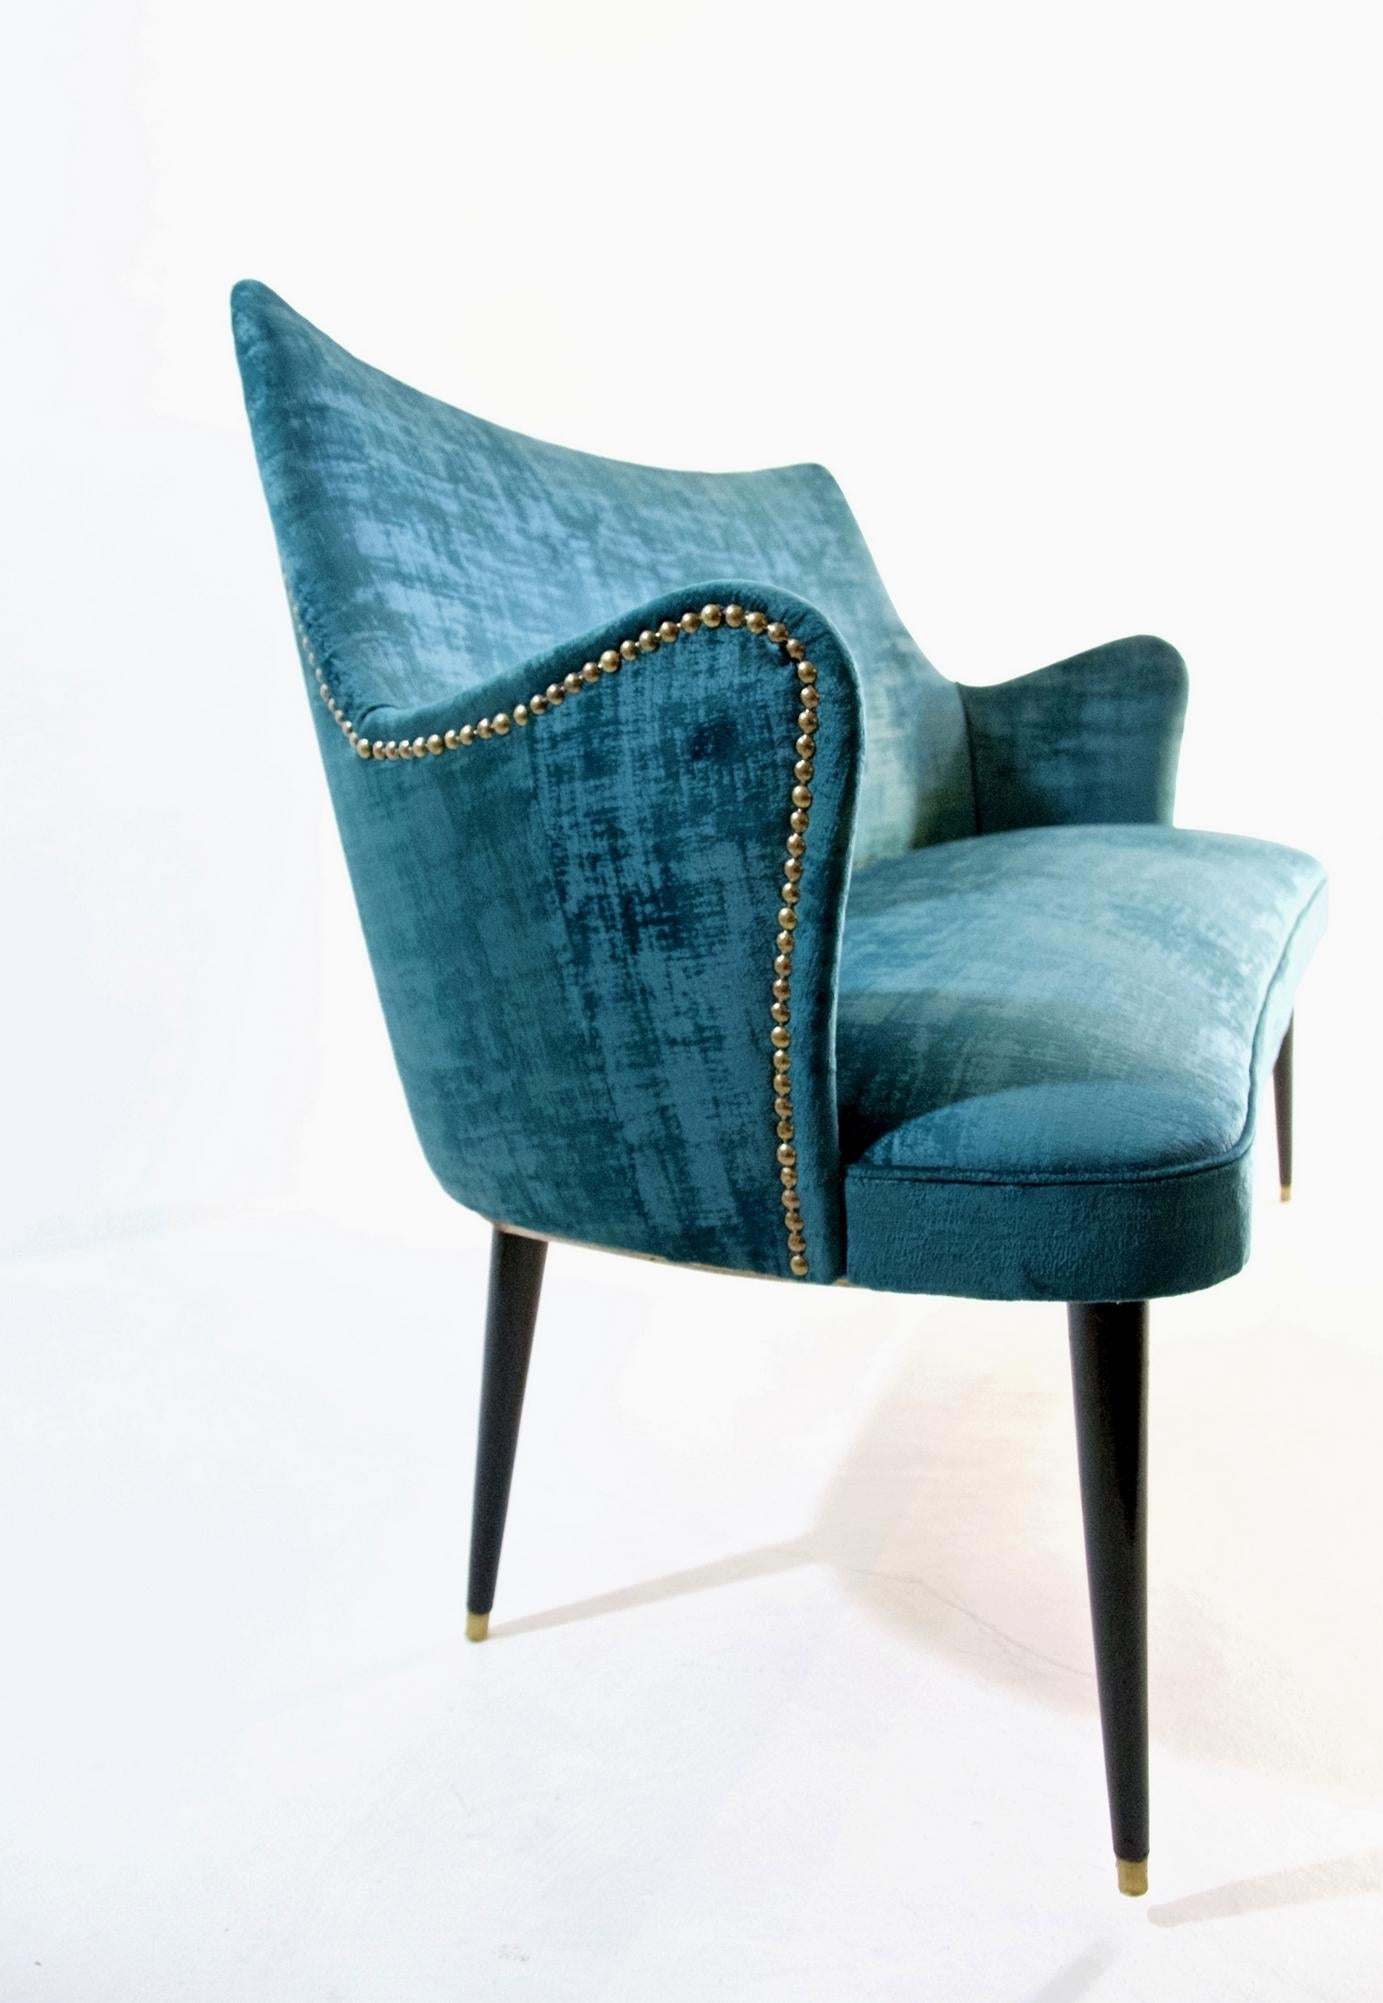 This sofa which is very rare was designed by Osvaldo Borsani in the 1950s and has been professionally restored and reupholstered. The fabric used is a high quality strong teal colored velvet and is easy to remove stains from. It has stained and